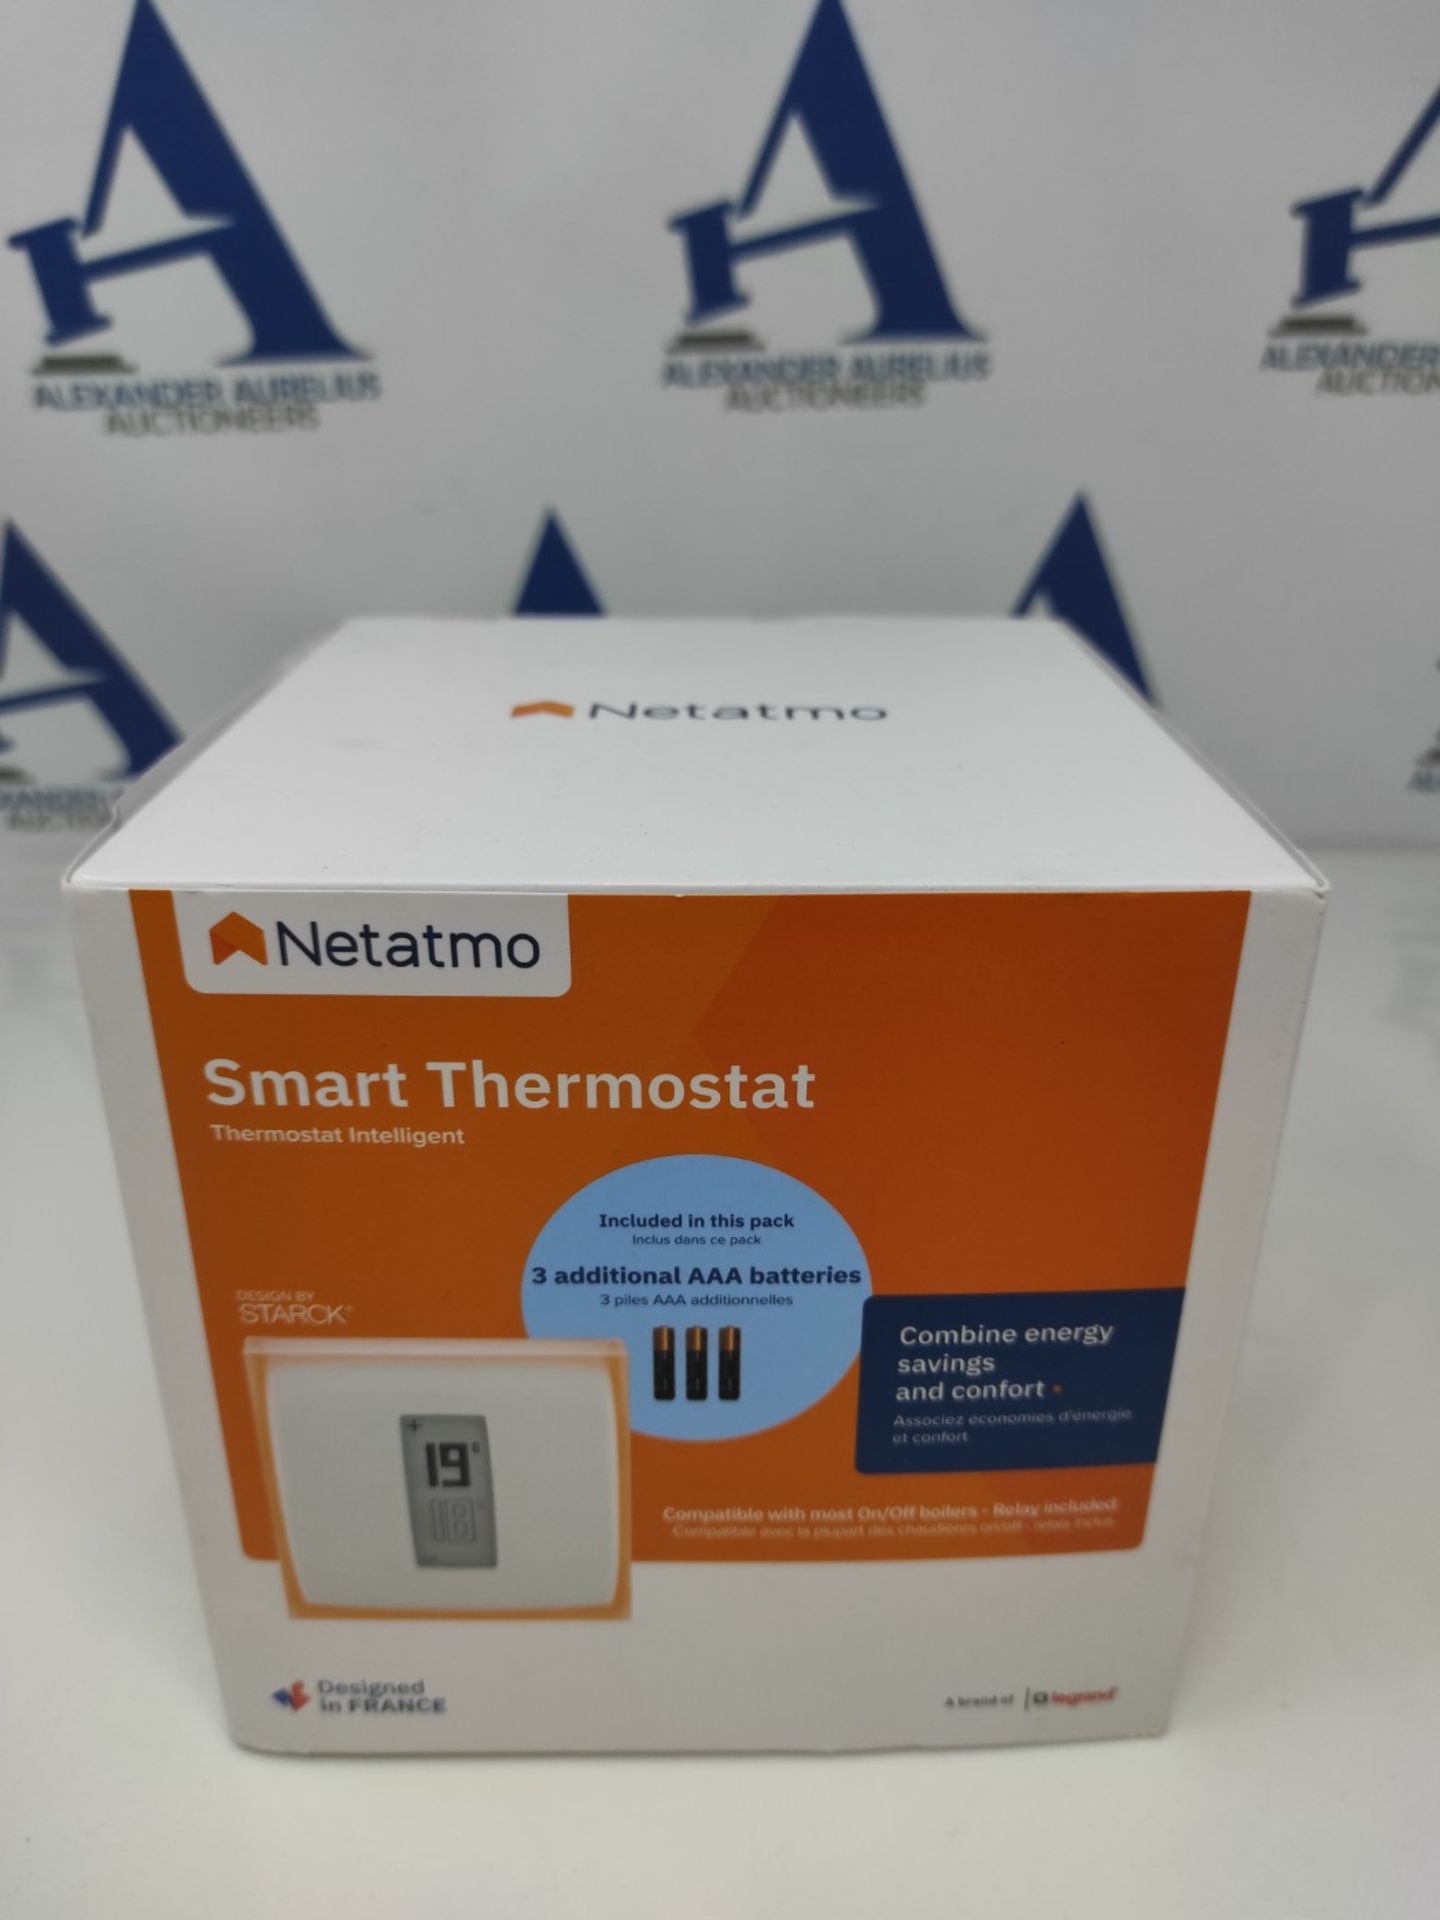 RRP £158.00 Netatmo Smart and Connected Thermostat Energy Efficient - WiFi - Reduce Bills & Contro - Image 2 of 3